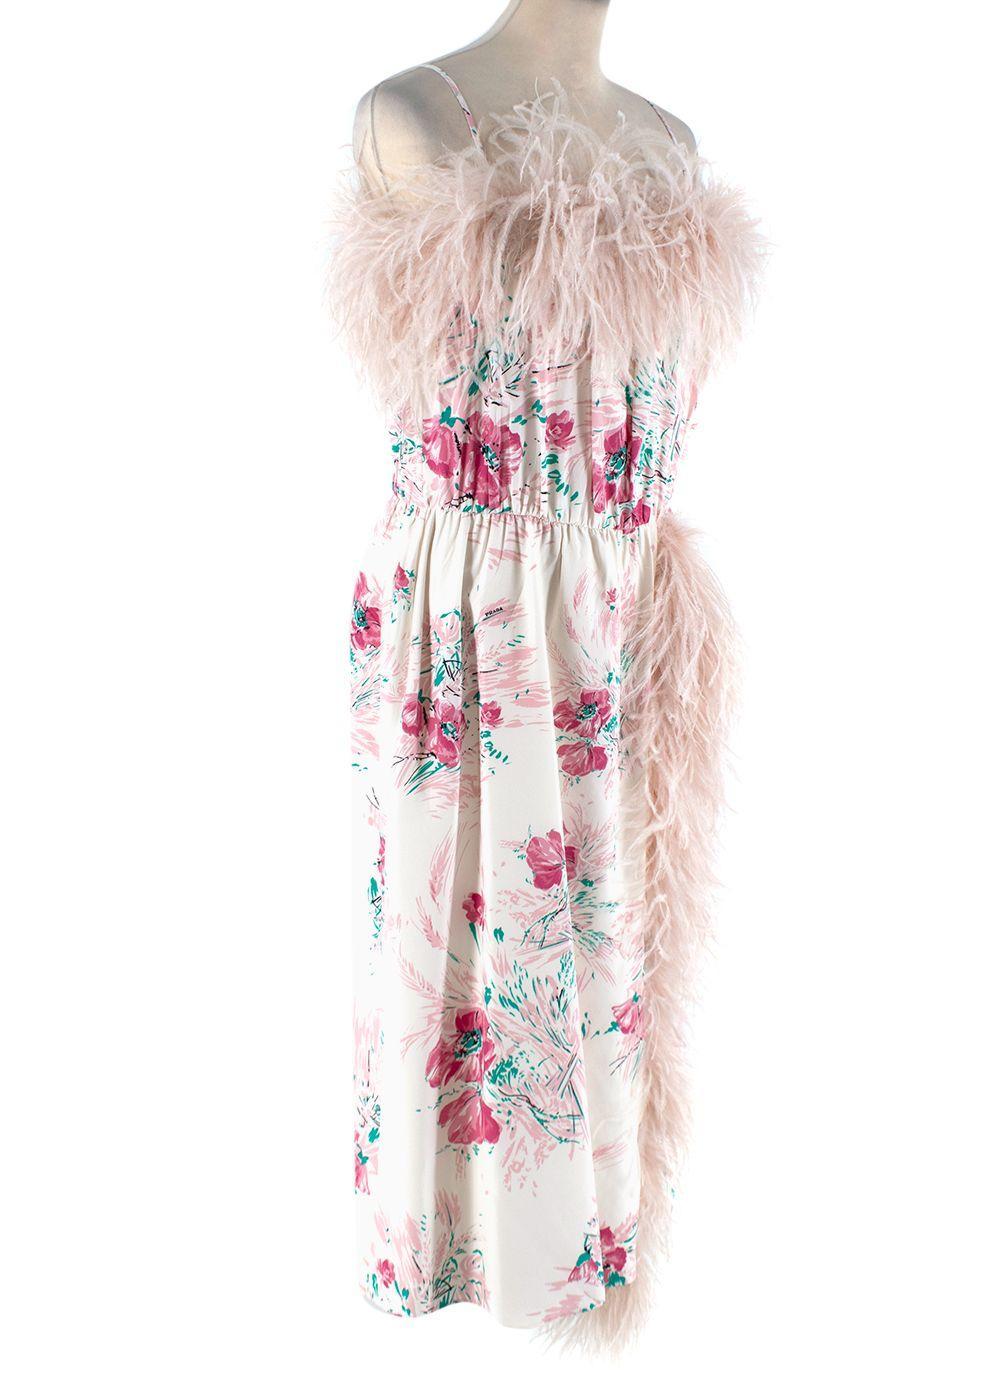 Pink Marabou-Trimmed Ivory Silk Floral Print Special Edition Dress

- Silk ivory sleeveless dress with floral print in fuchsia and green hues
- Ostrich feather trim in light pink to the collar and side slit
- Elasticated waistband
- Side